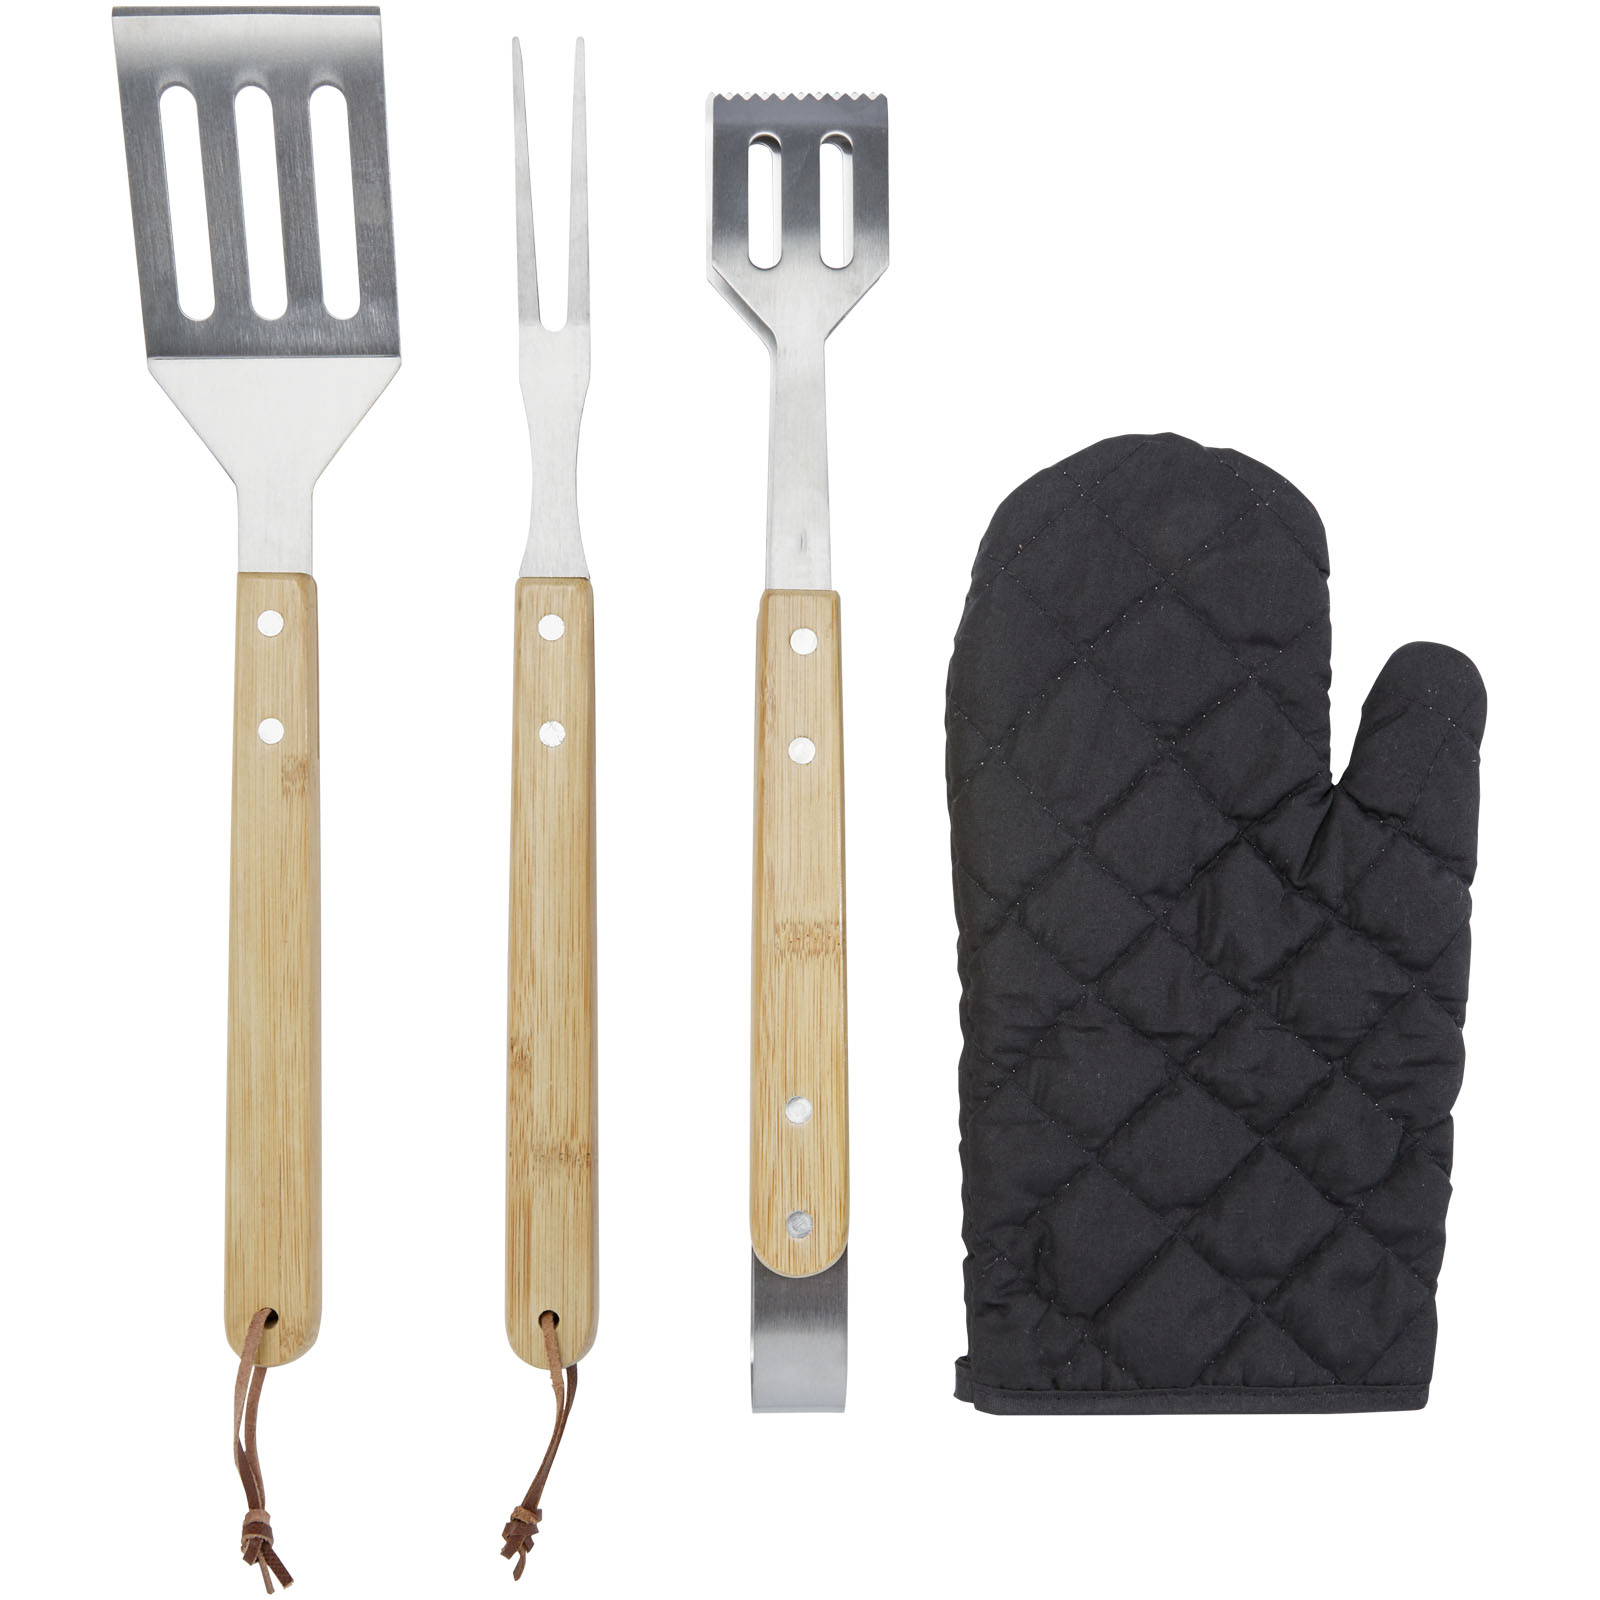 Advertising BBQ Accessories - Gril 3-piece BBQ tools set and glove  - 3